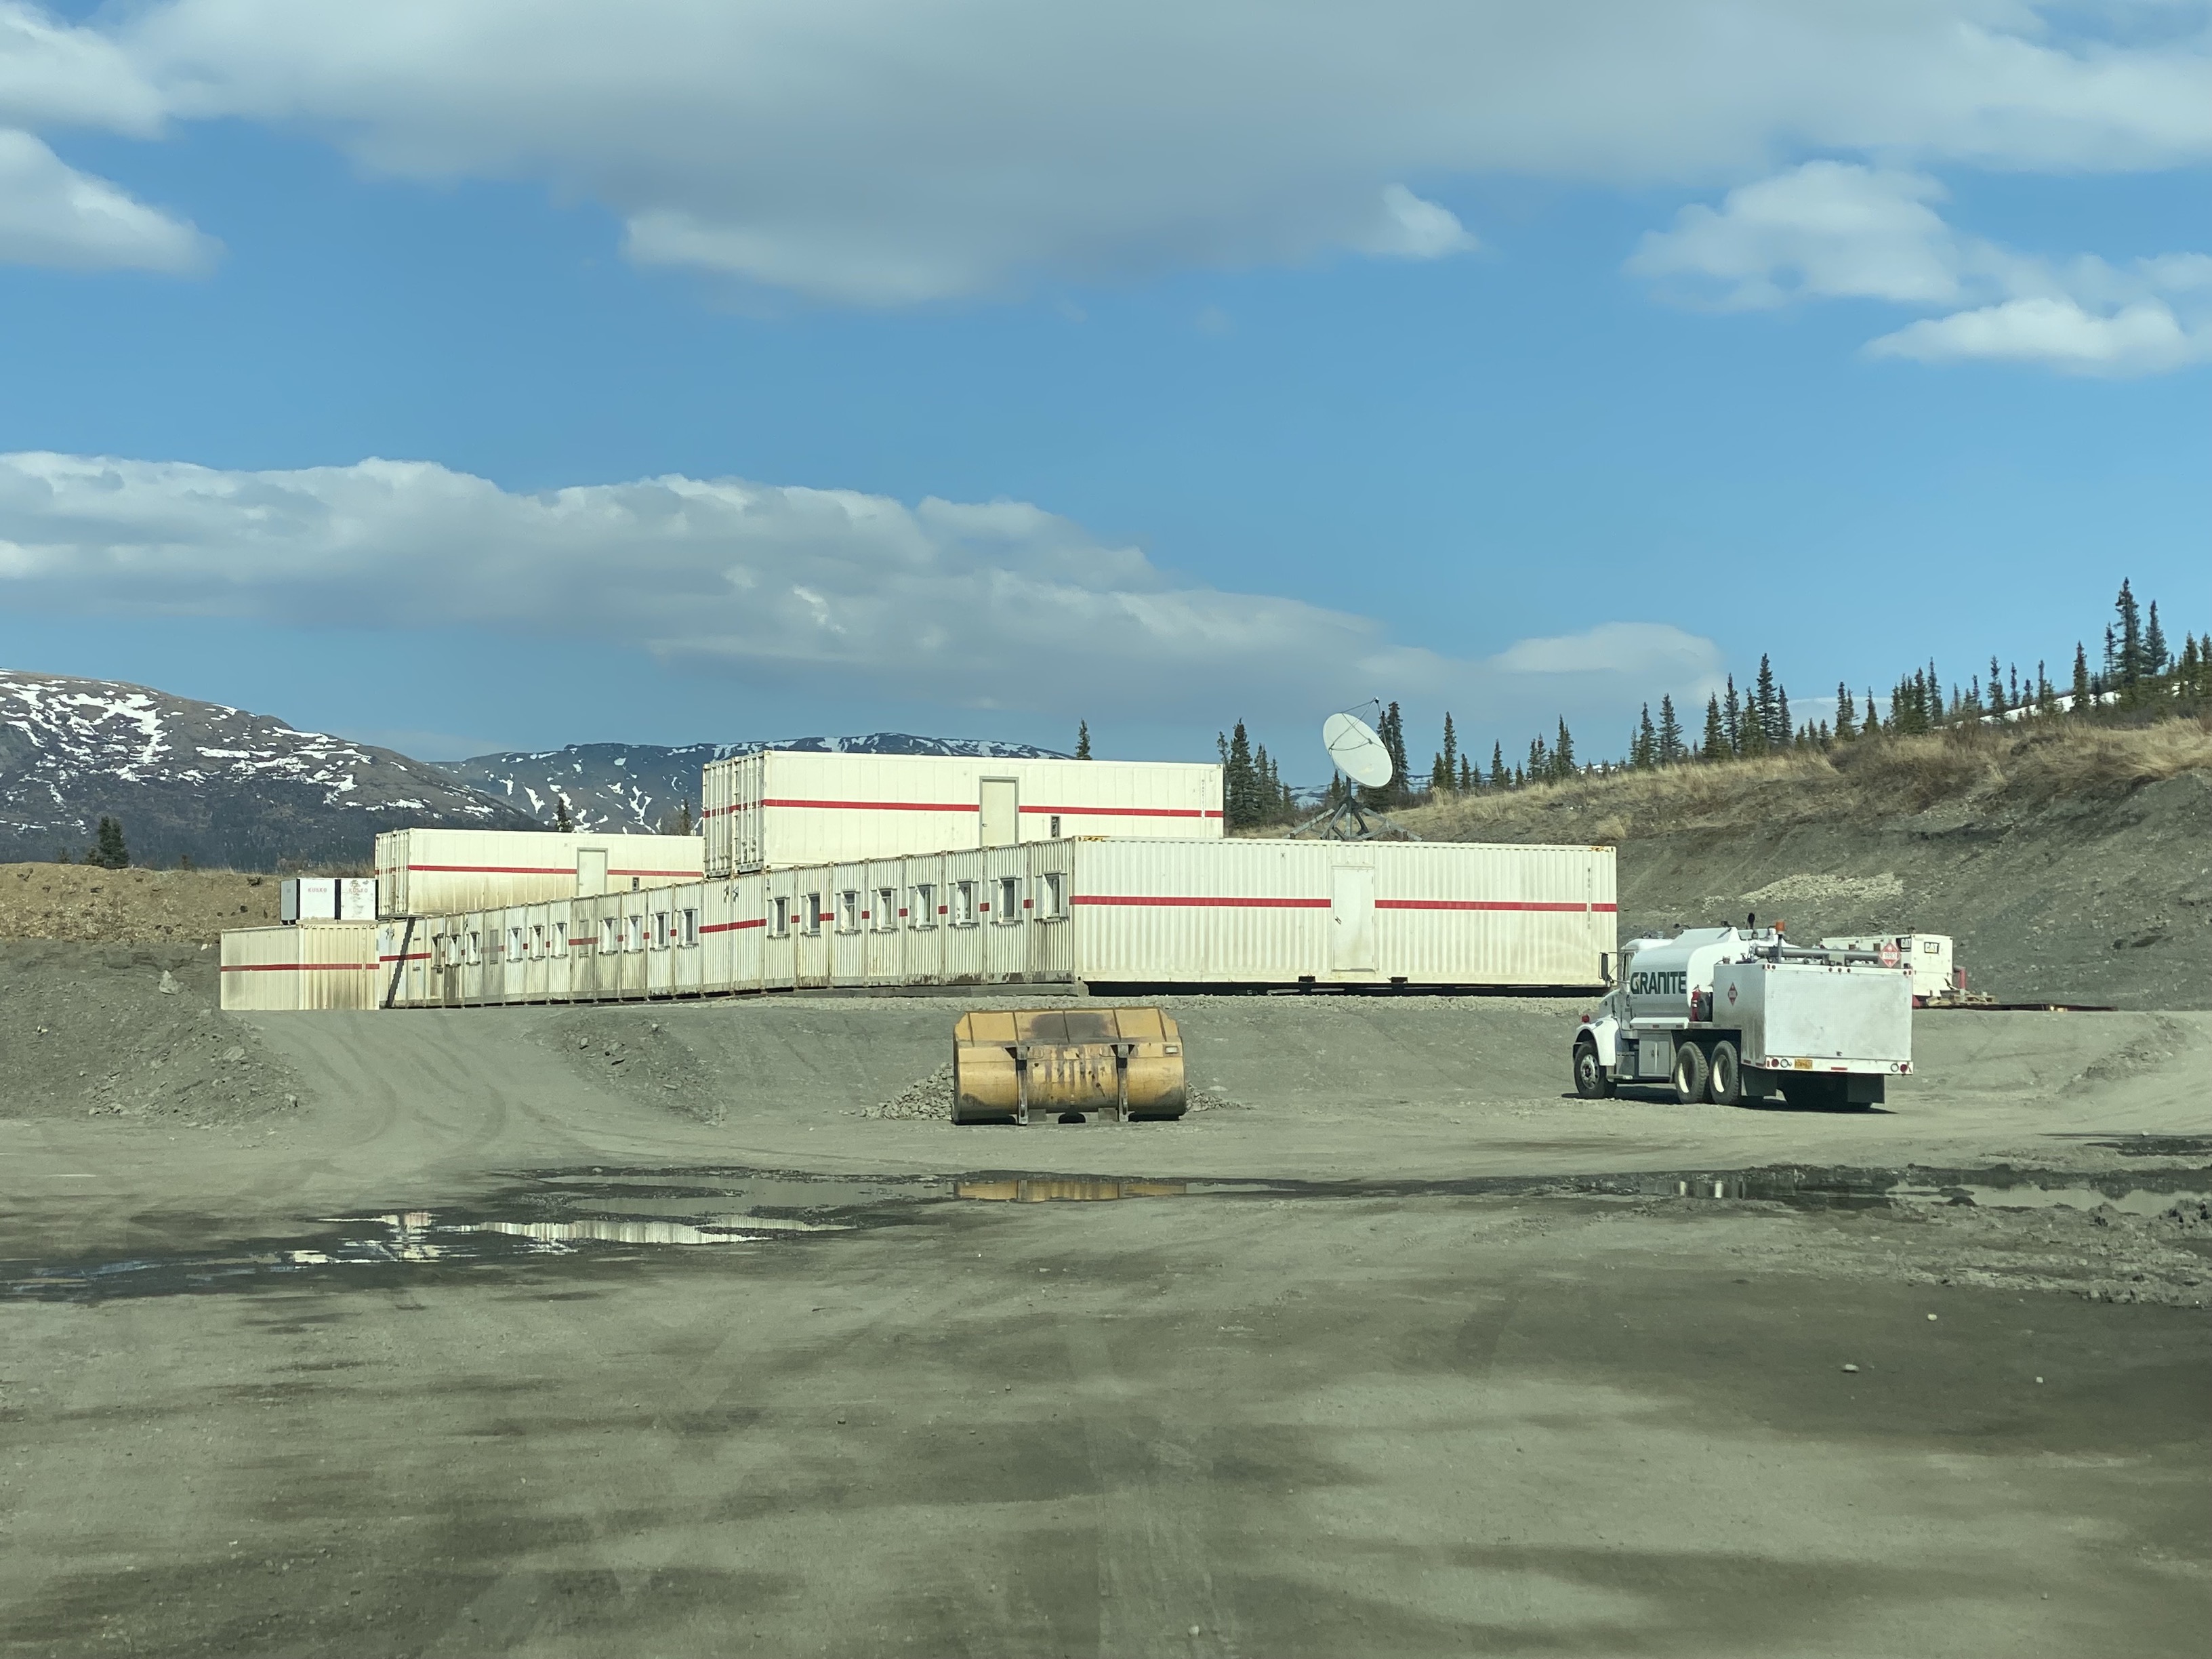 Many mobile trailer buildings are connected side by side into a large unit. The unit is located in a large gravel pit with a few construction vehicles parked nearby.